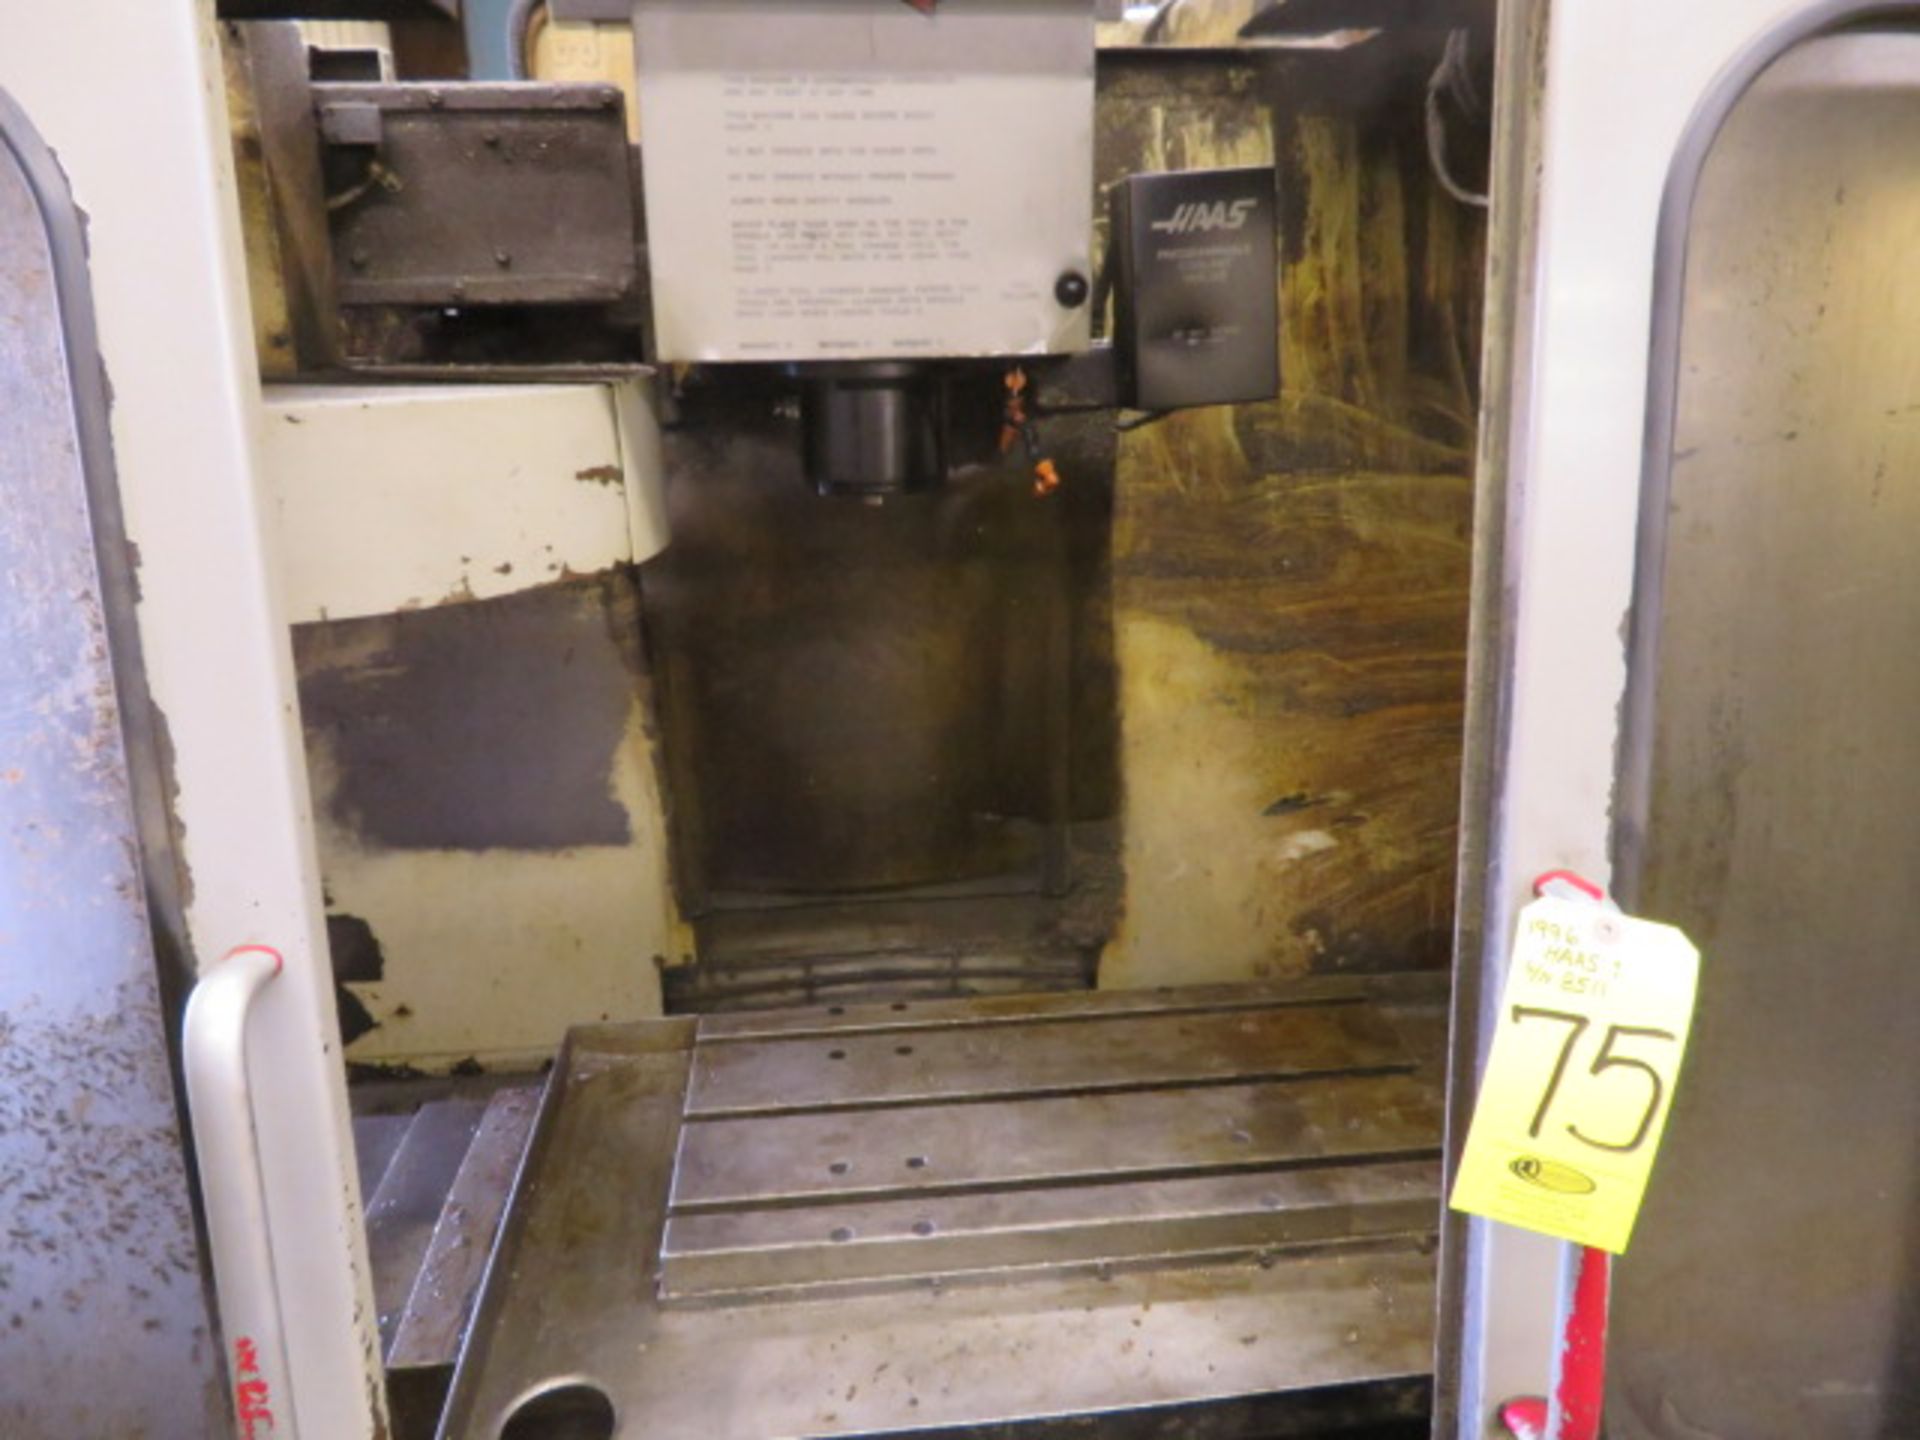 1996 HAAS VF-1 CNC Vertical Machining Center, S/N 8511, HAAS CNC Control 4TH AXIS ENABLED W/ DRIVE - Image 2 of 6